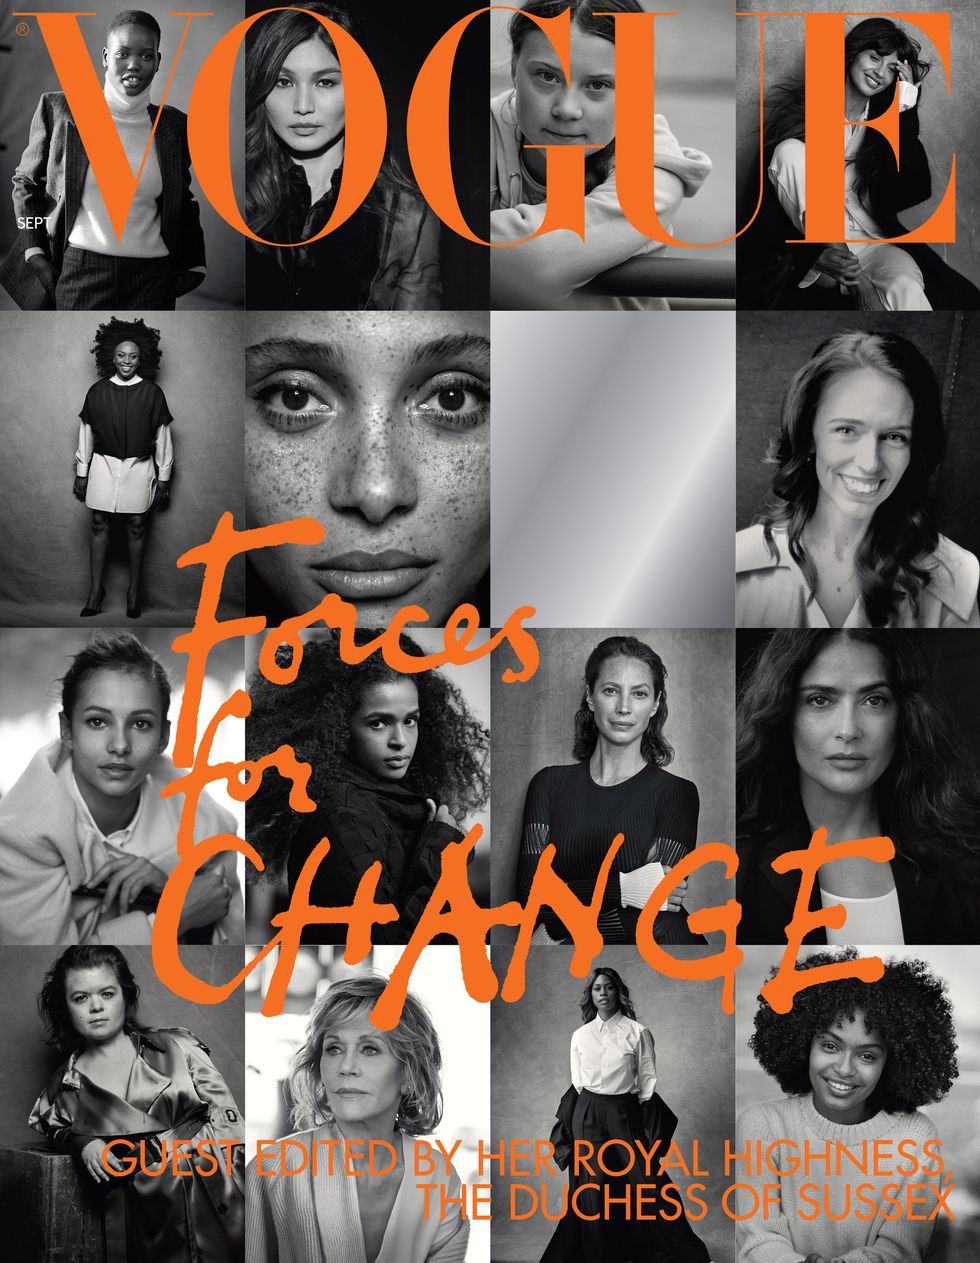 The cover of British Vogue's September issue, guest edited by Meghan Markle